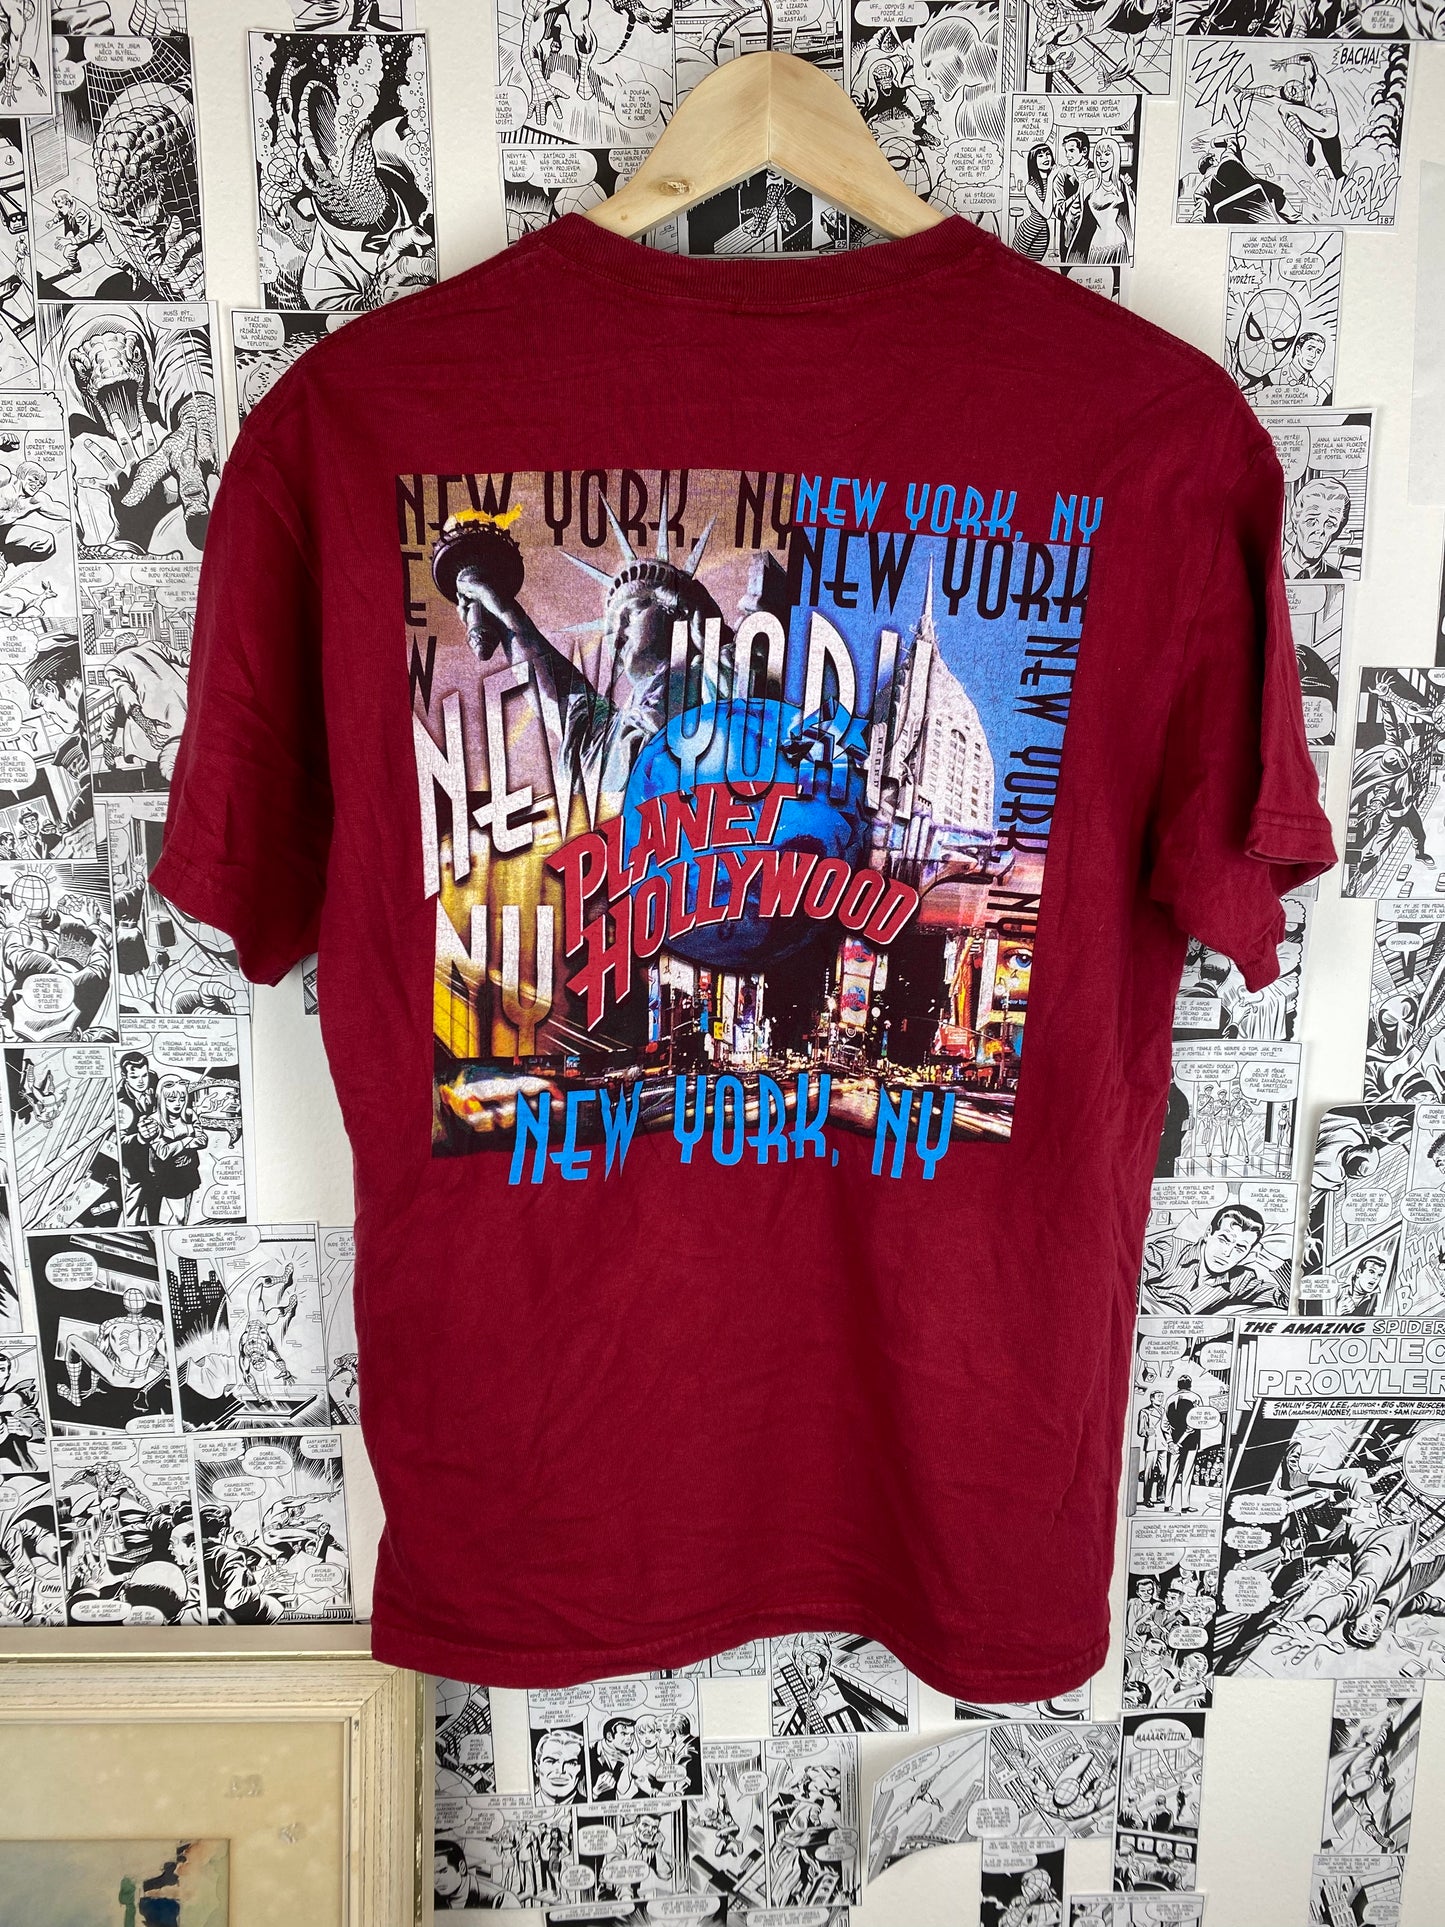 Vintage Planet Hollywood NYC t-shirt - size M